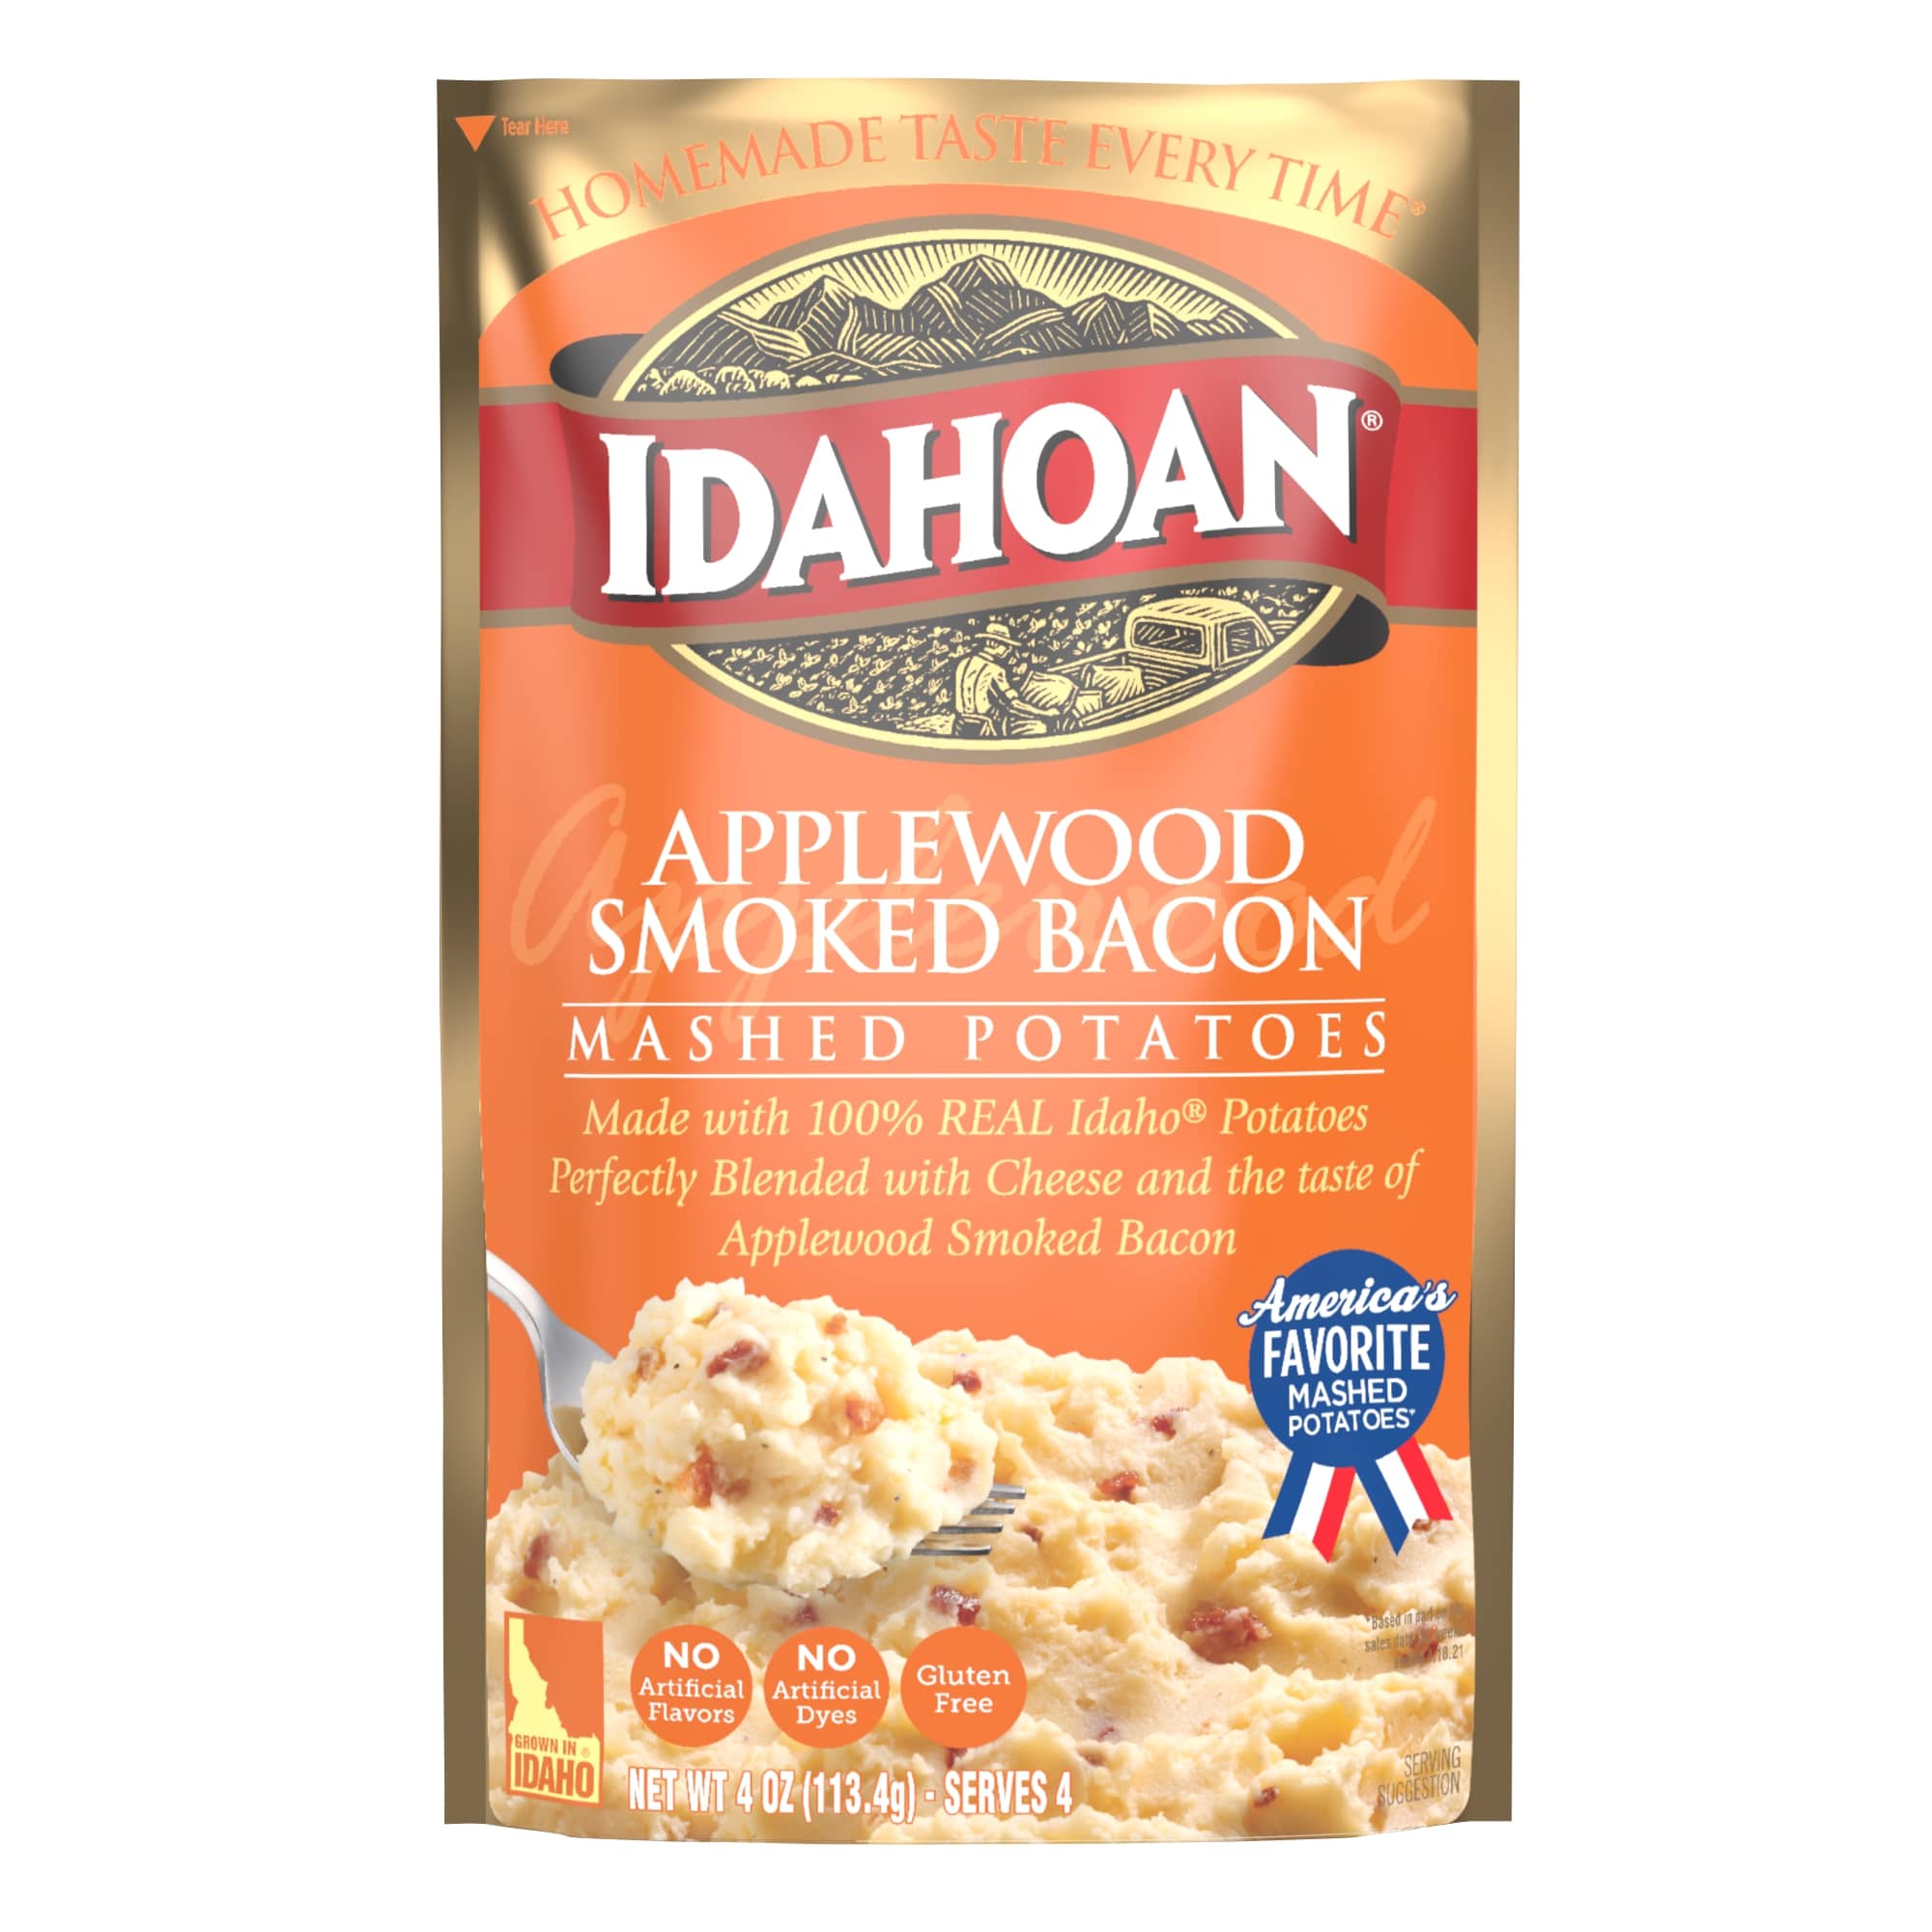 Idahoan Applewood Smoked Bacon Mashed Potatoes, 4 Ounce Pouch -- 12 per case.